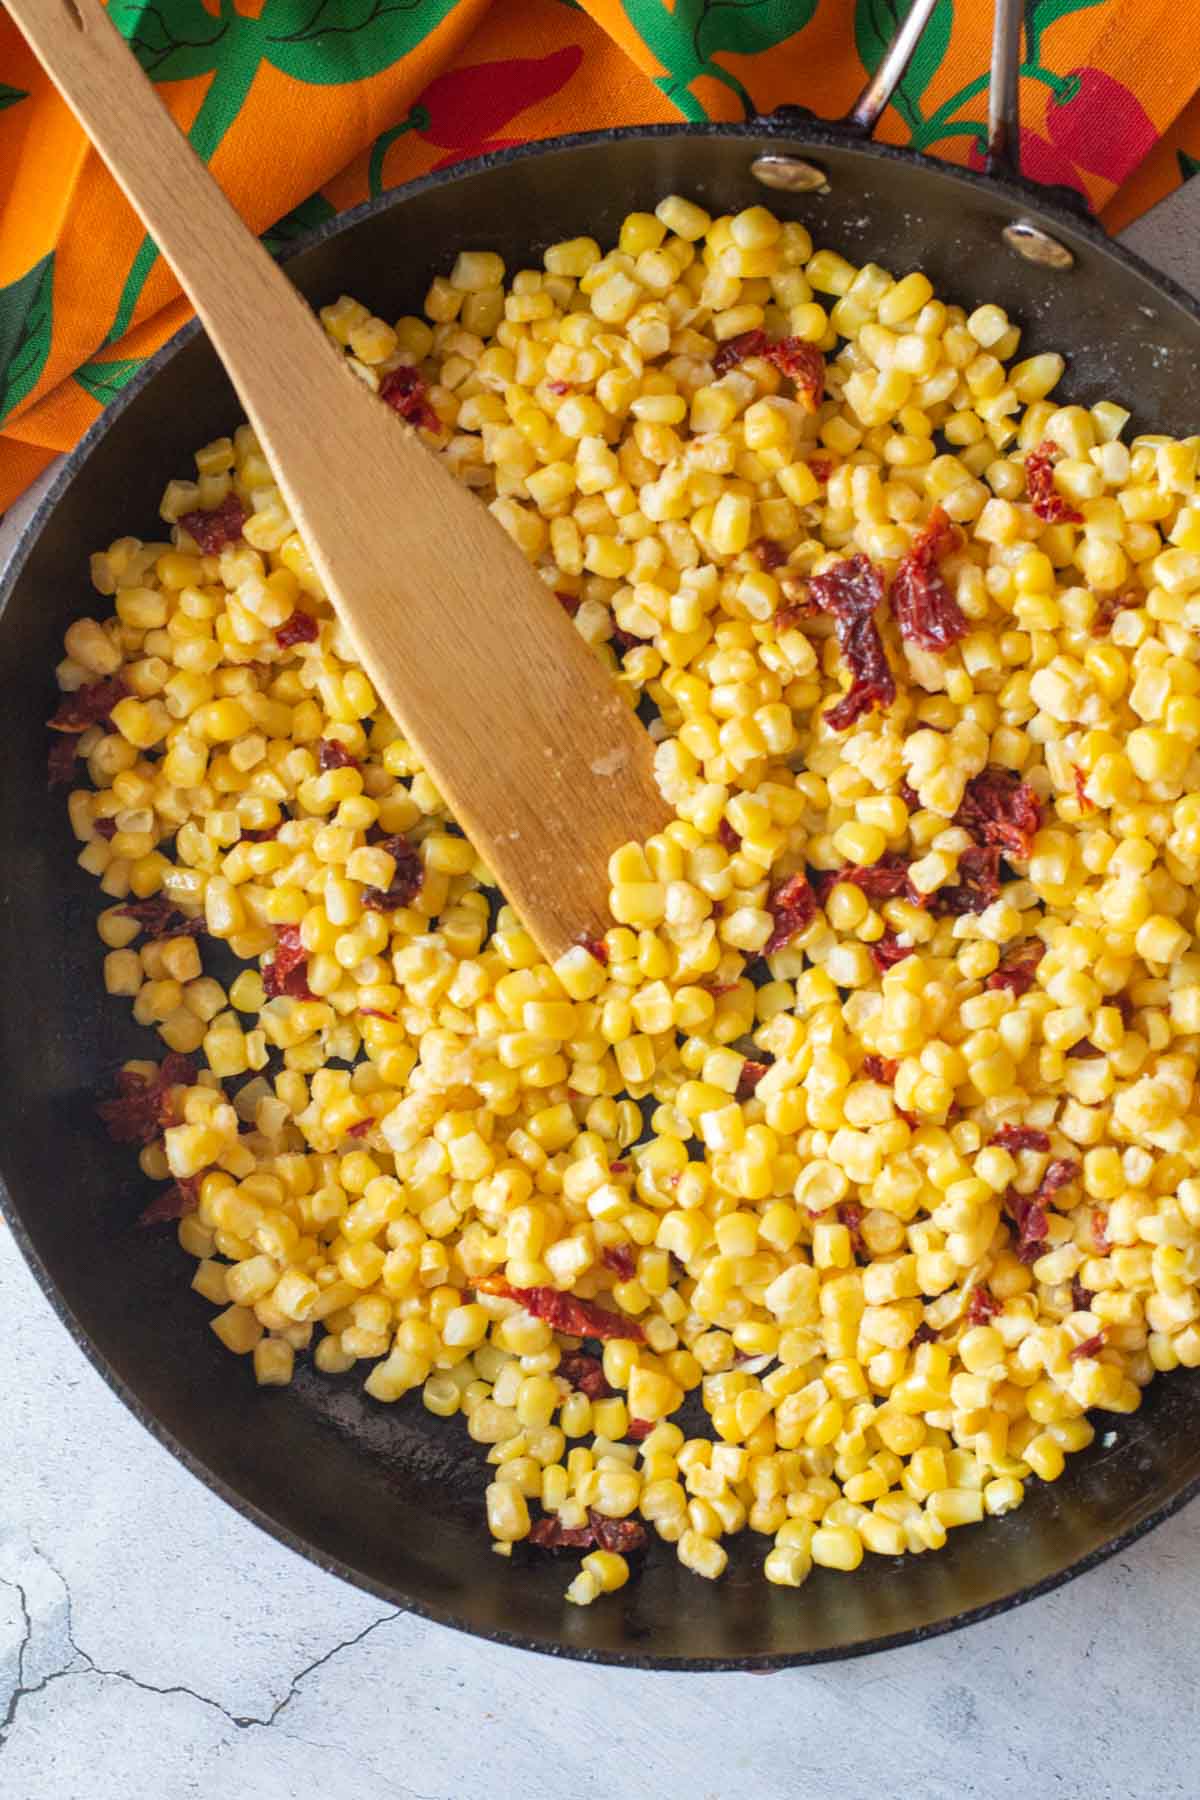 Frying corn for skillet corn with sun-dried tomatoes.